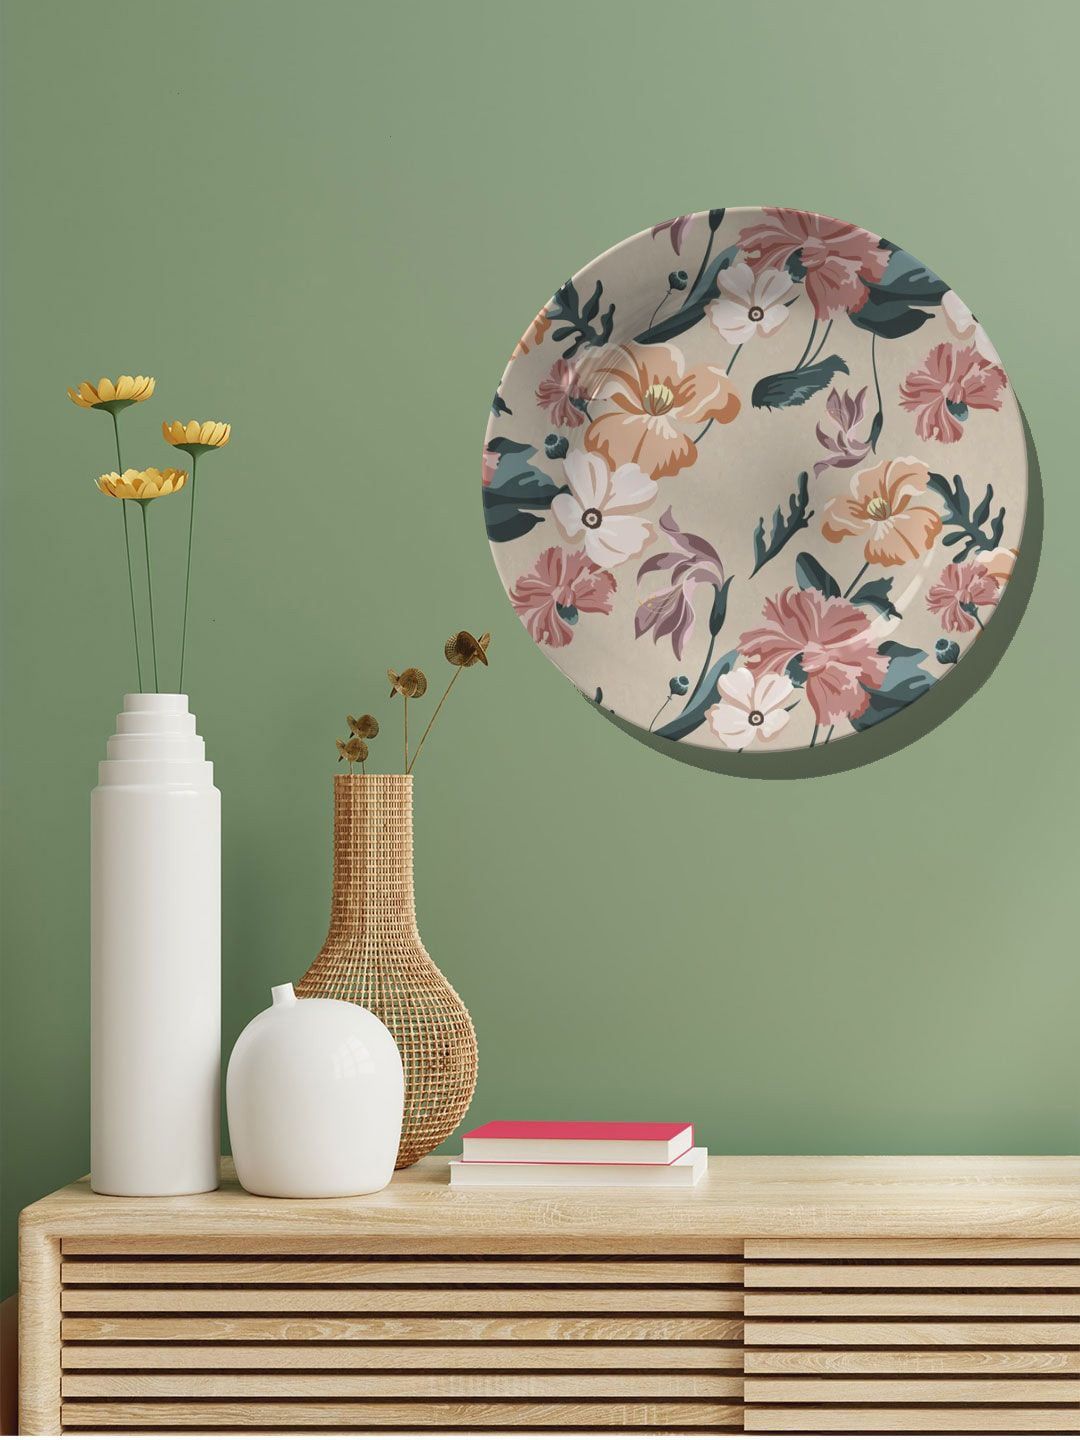 ARTSPACE Beige & Green Floral Painted Decorative Ceramic Wall Plates Price in India